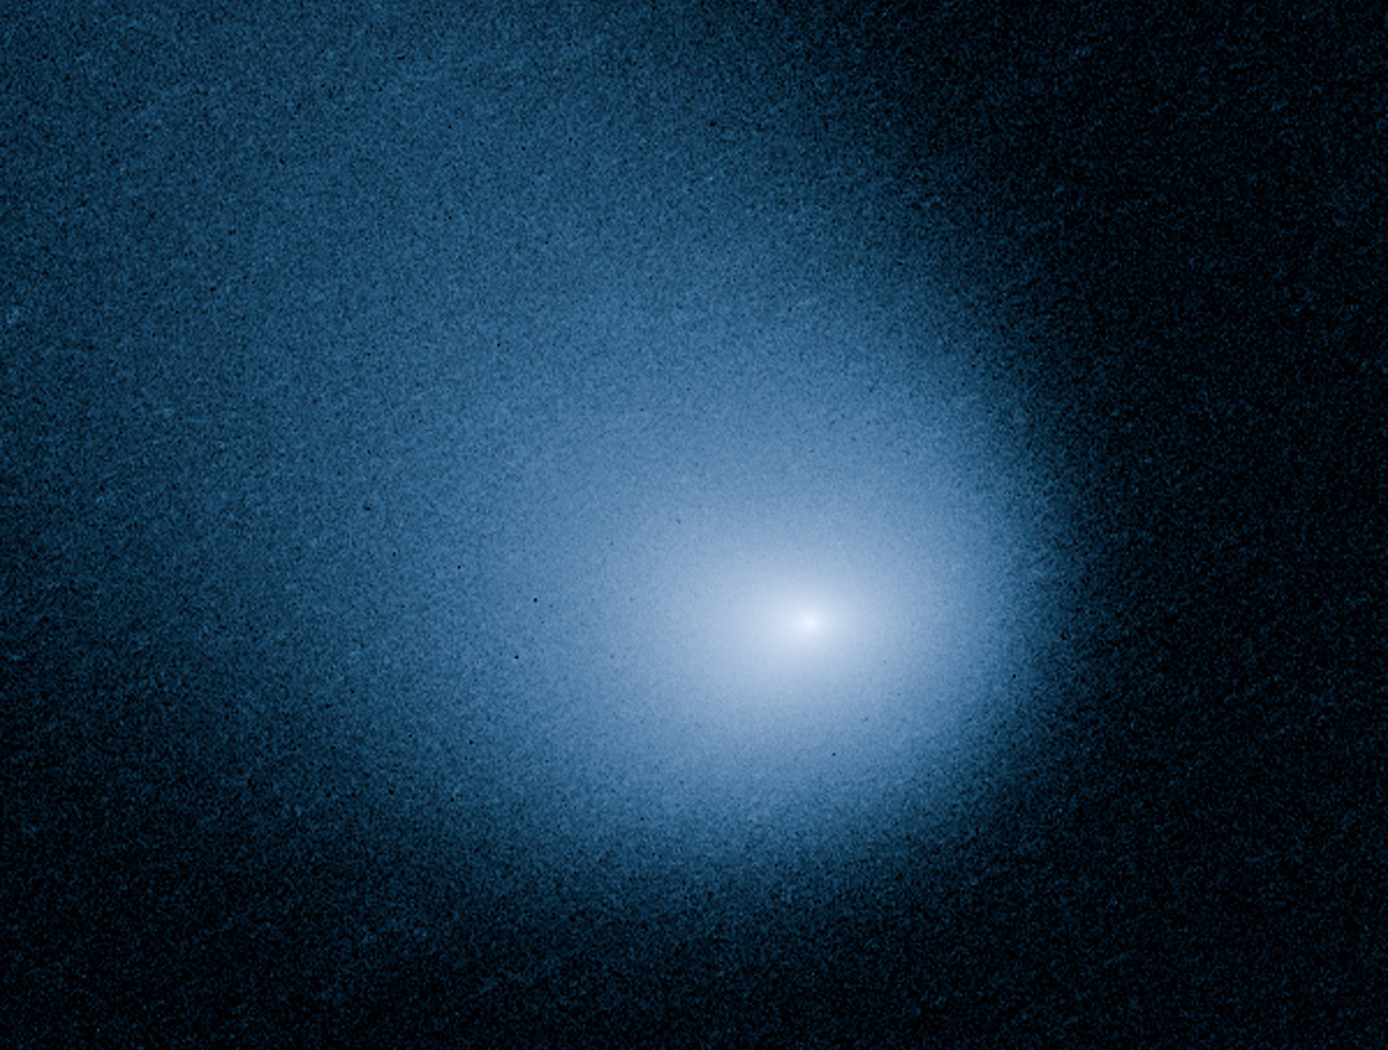 Hubble's View of Comet Siding Spring; Credit: NASA, ESA, and J.-Y. Li (Planetary Science Institute)